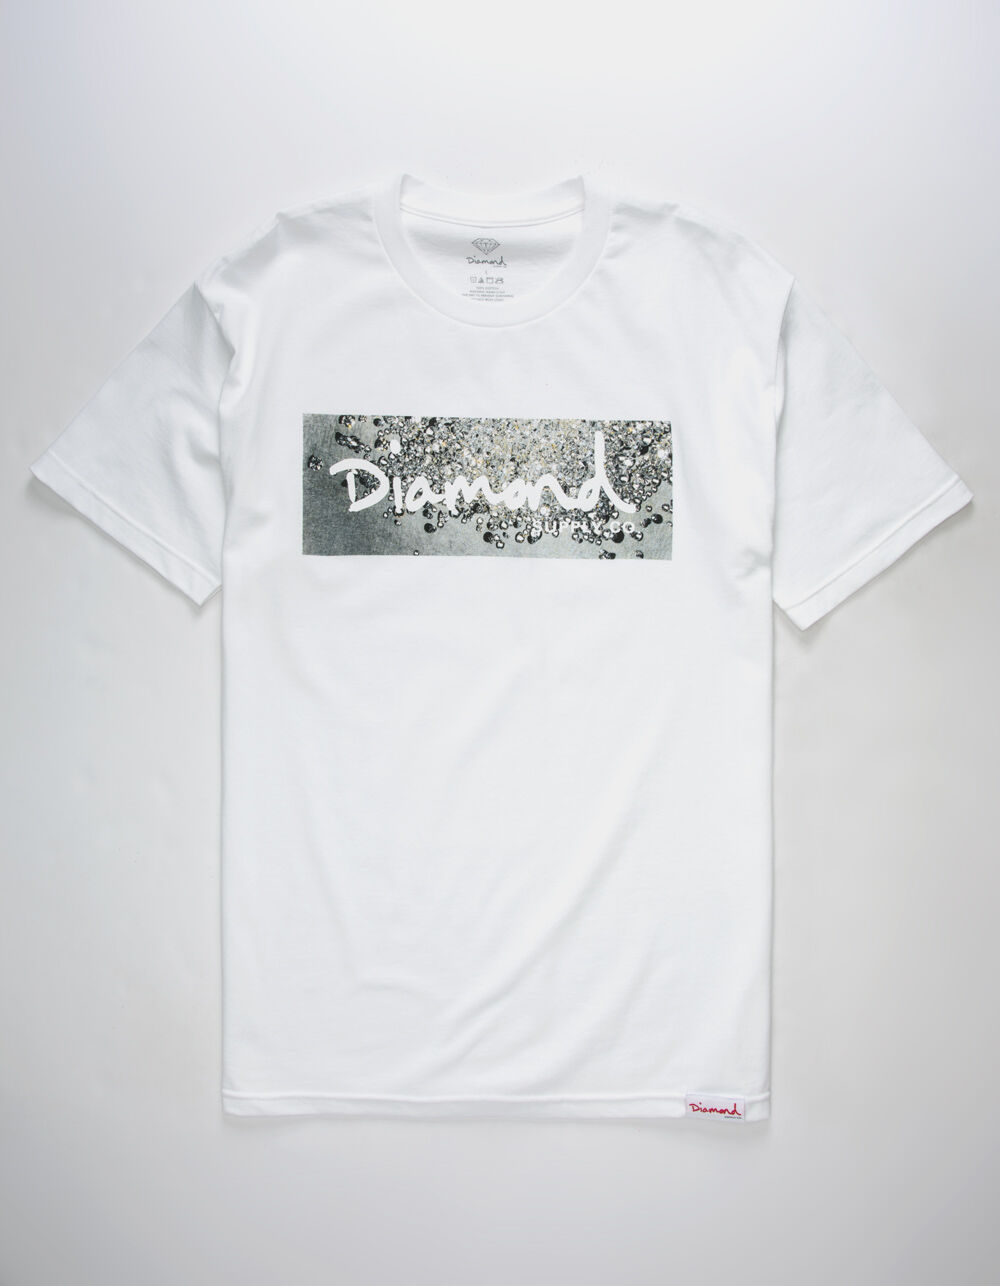 DIAMOND SUPPLY CO. Scattered Box Mens T-Shirt image number 0